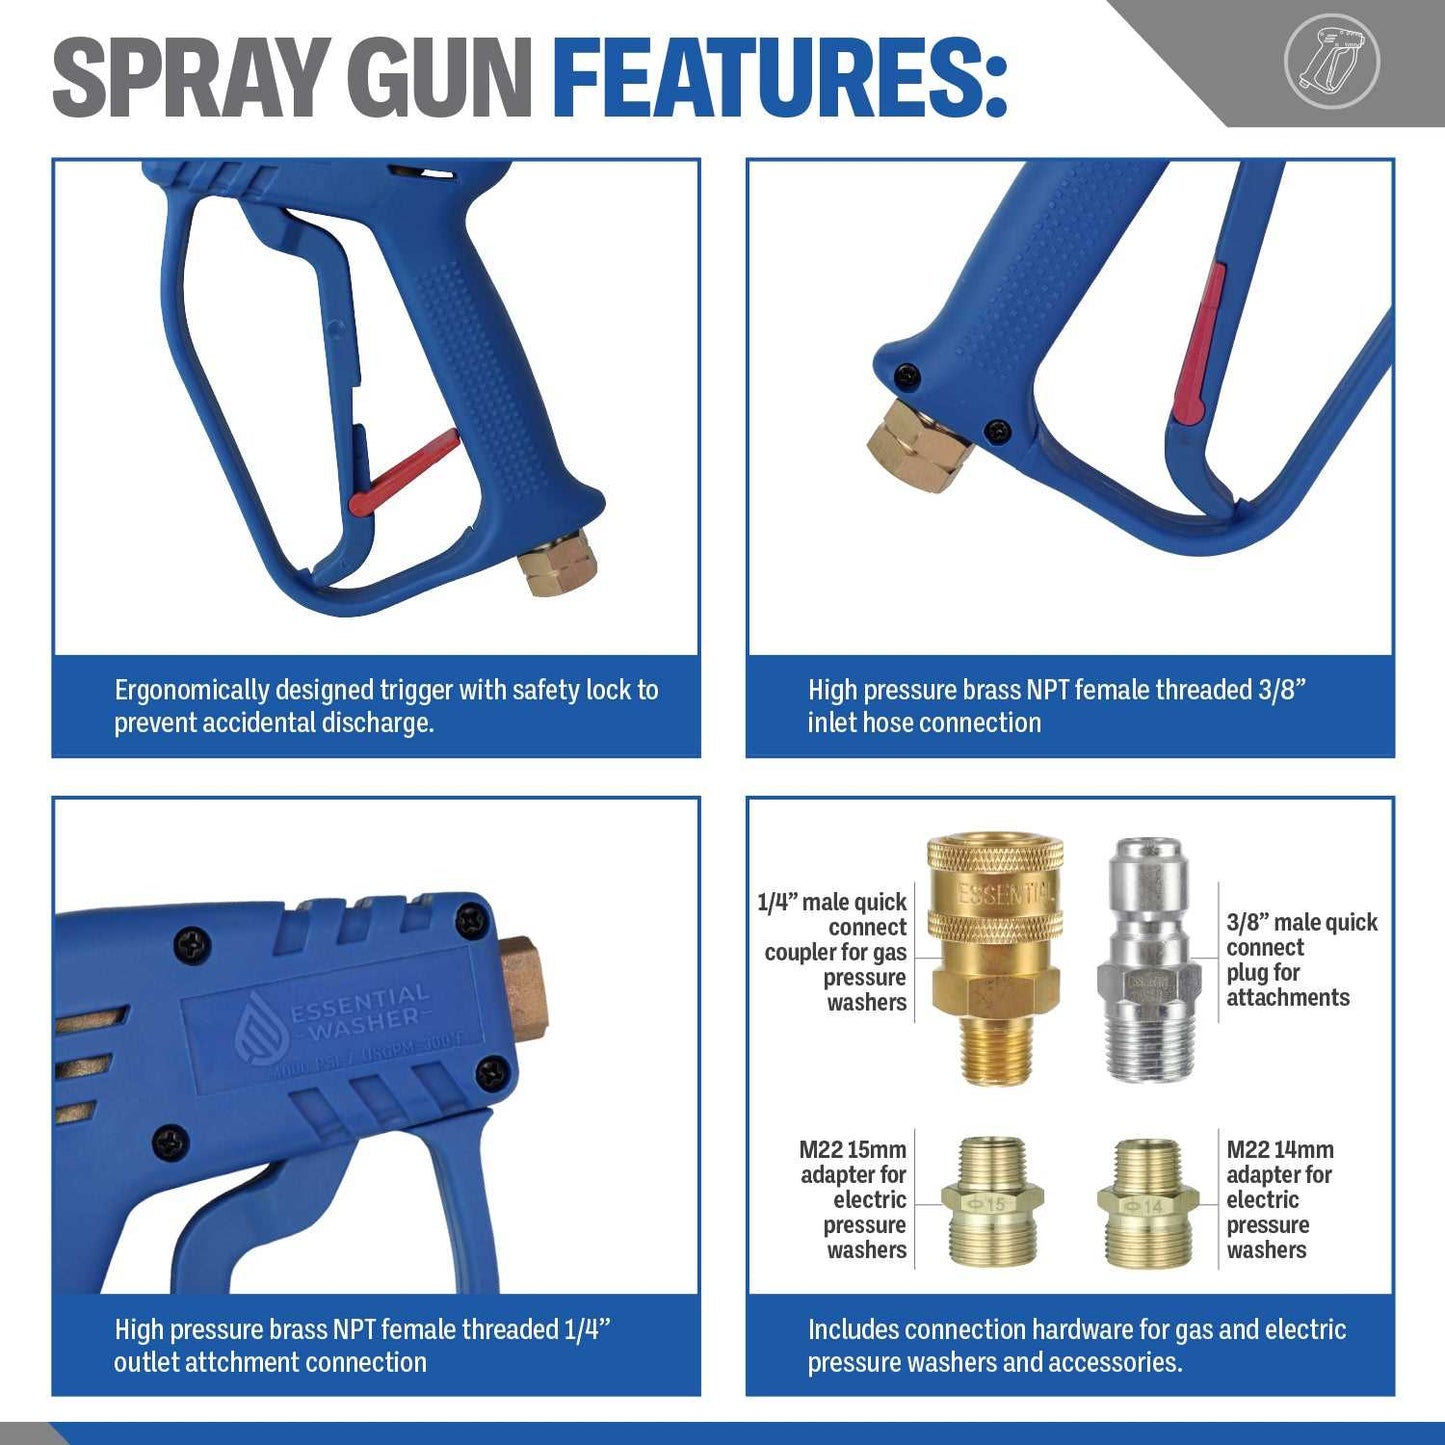 Heavy Duty Spray Gun With Brass Components & M22 Adaptors | Ideal for Electric Pressure Washers